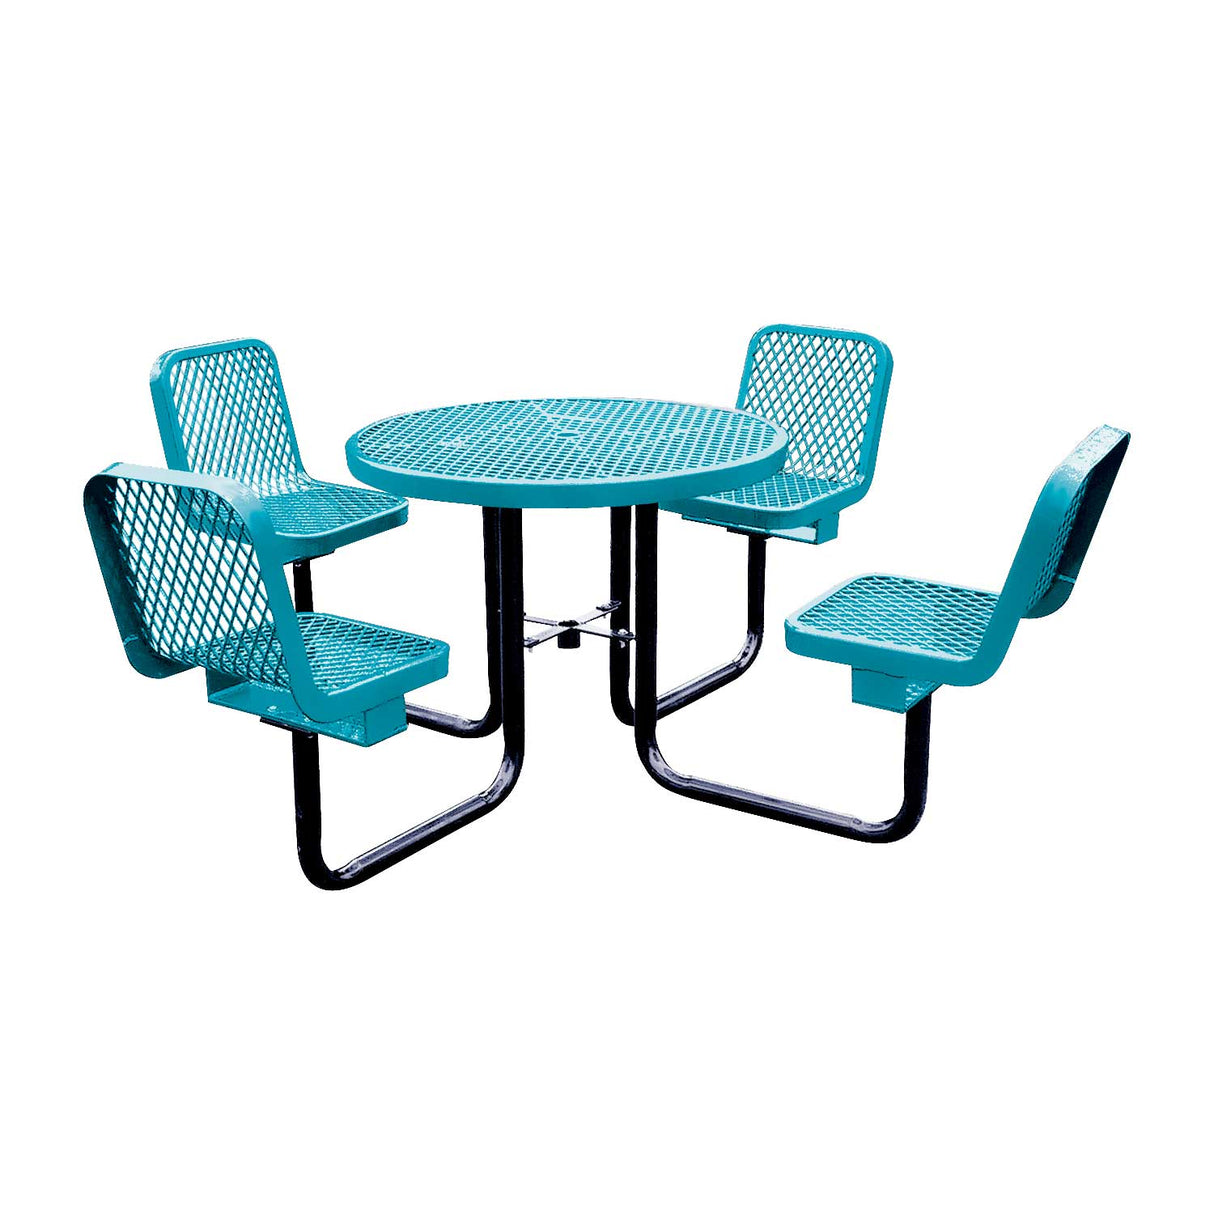 round expanded table with 4 attached seats